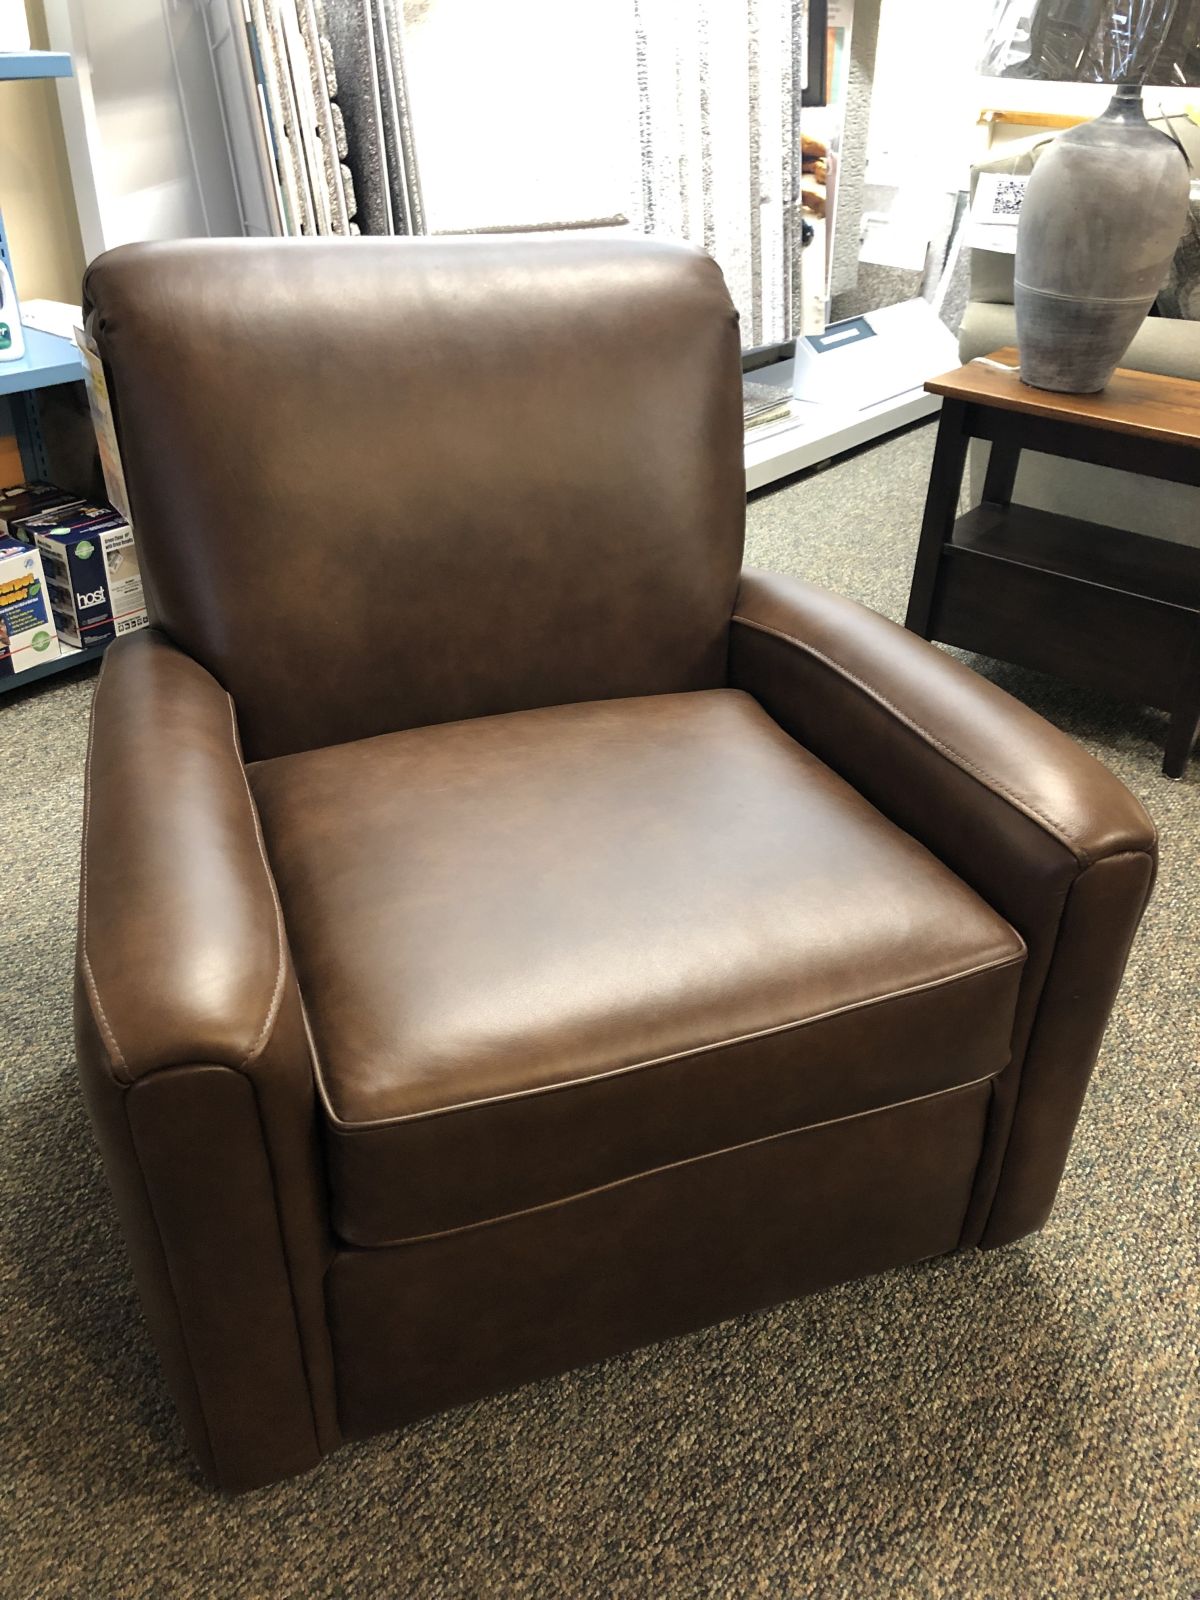 England 20569AL Leather Chair Revelation Fudgecicle 2154330 On Sale for $1,188.88